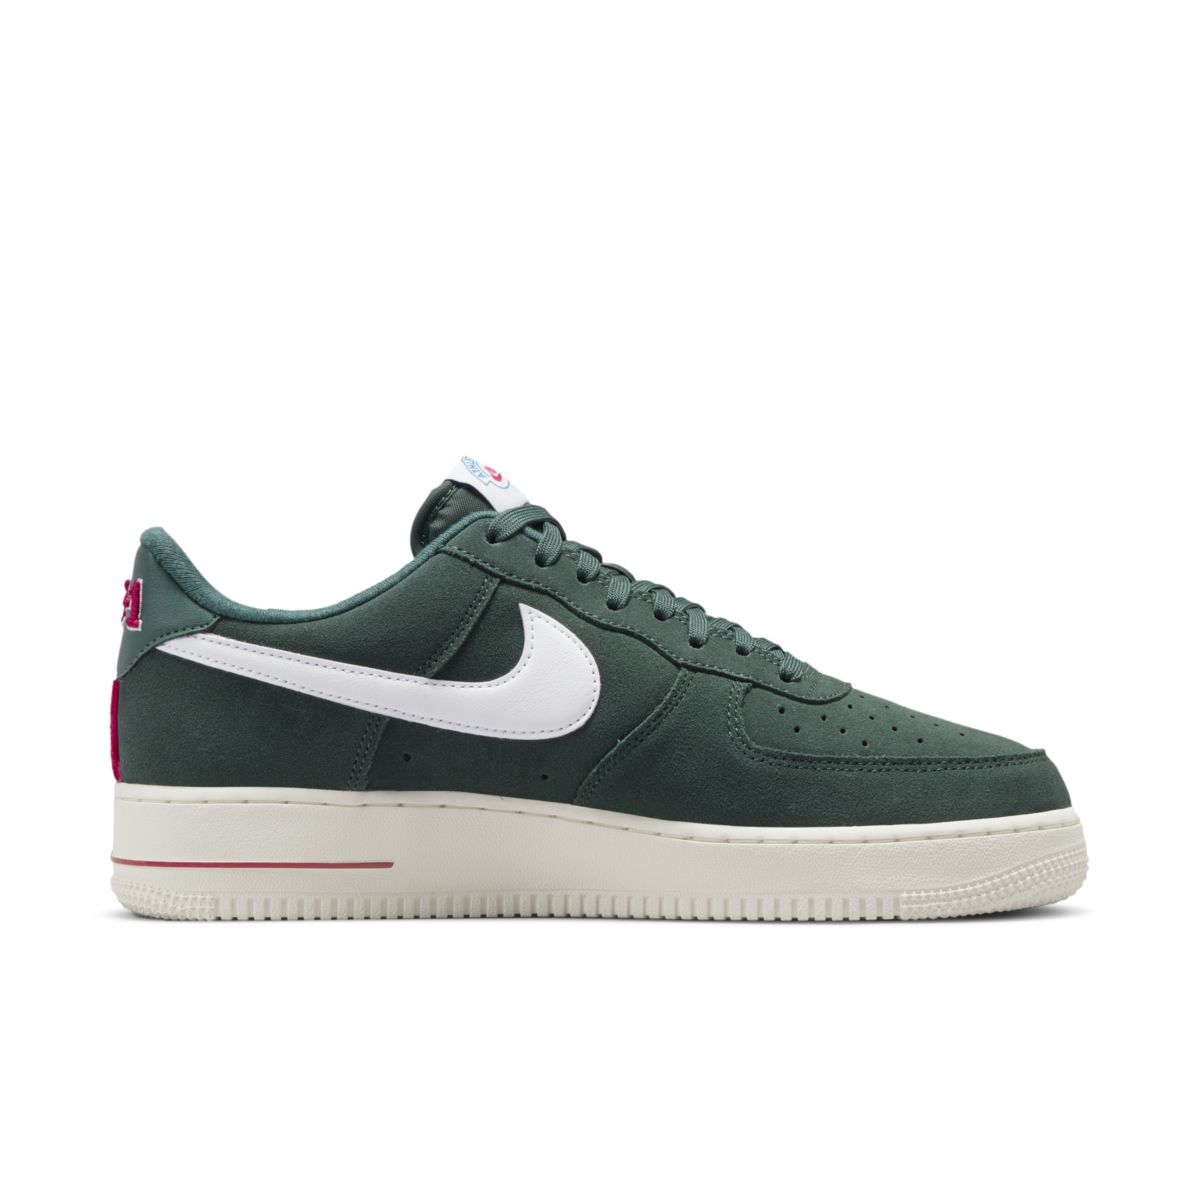 Nike Air Force 1 Low Athletic Club Pro Green DH7435-300 3